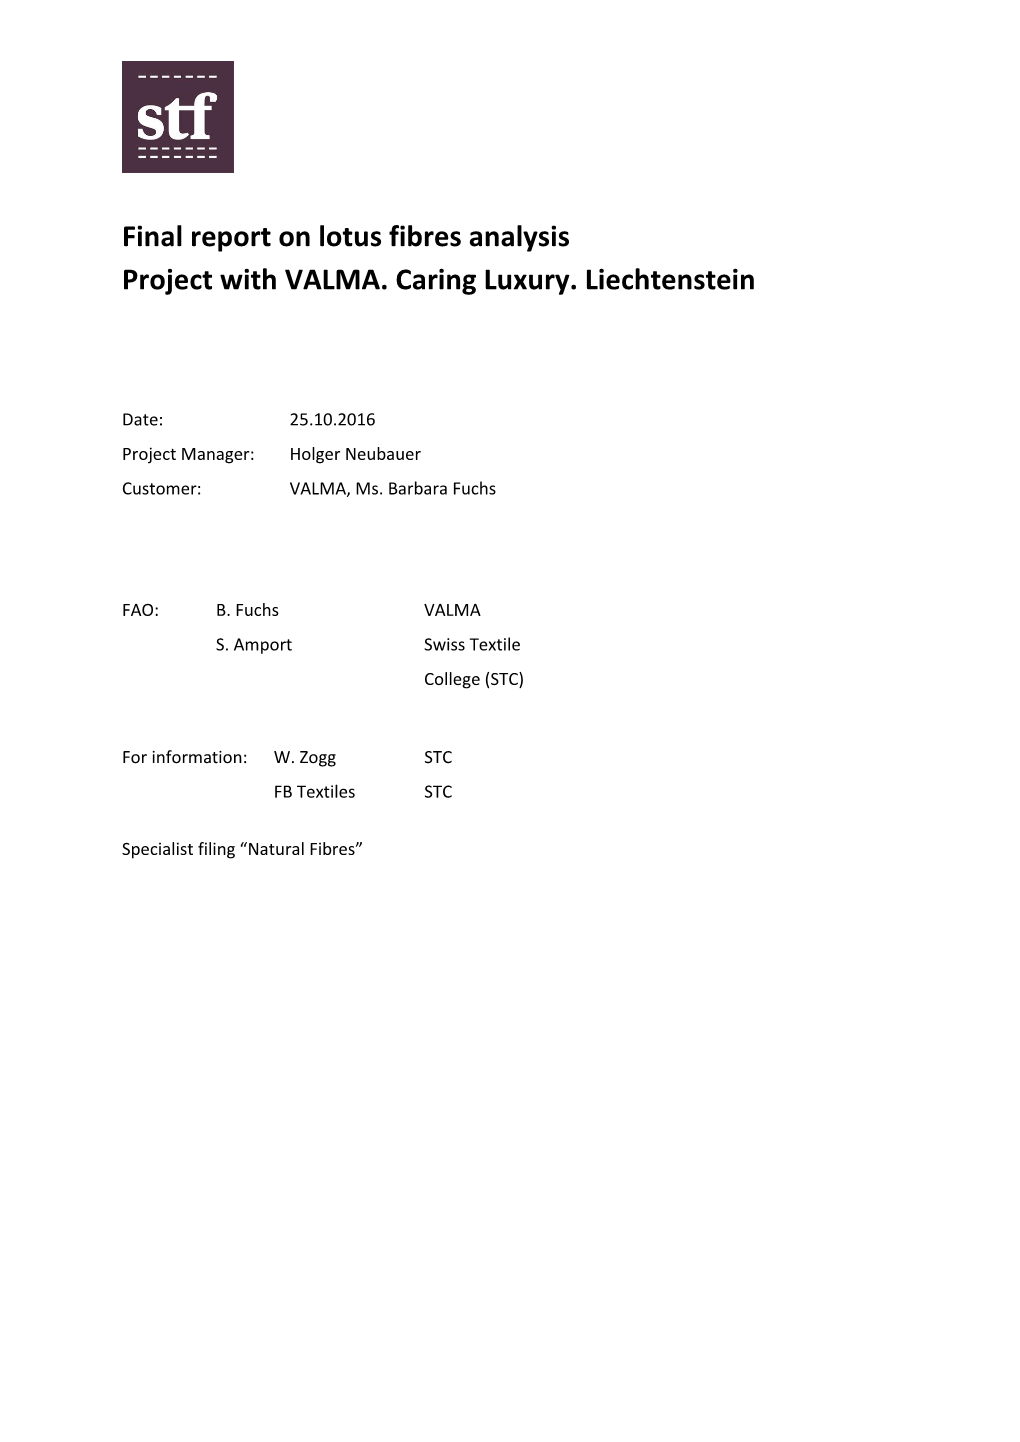 Final Report on Lotus Fibres Analysis Project with VALMA. Caring Luxury